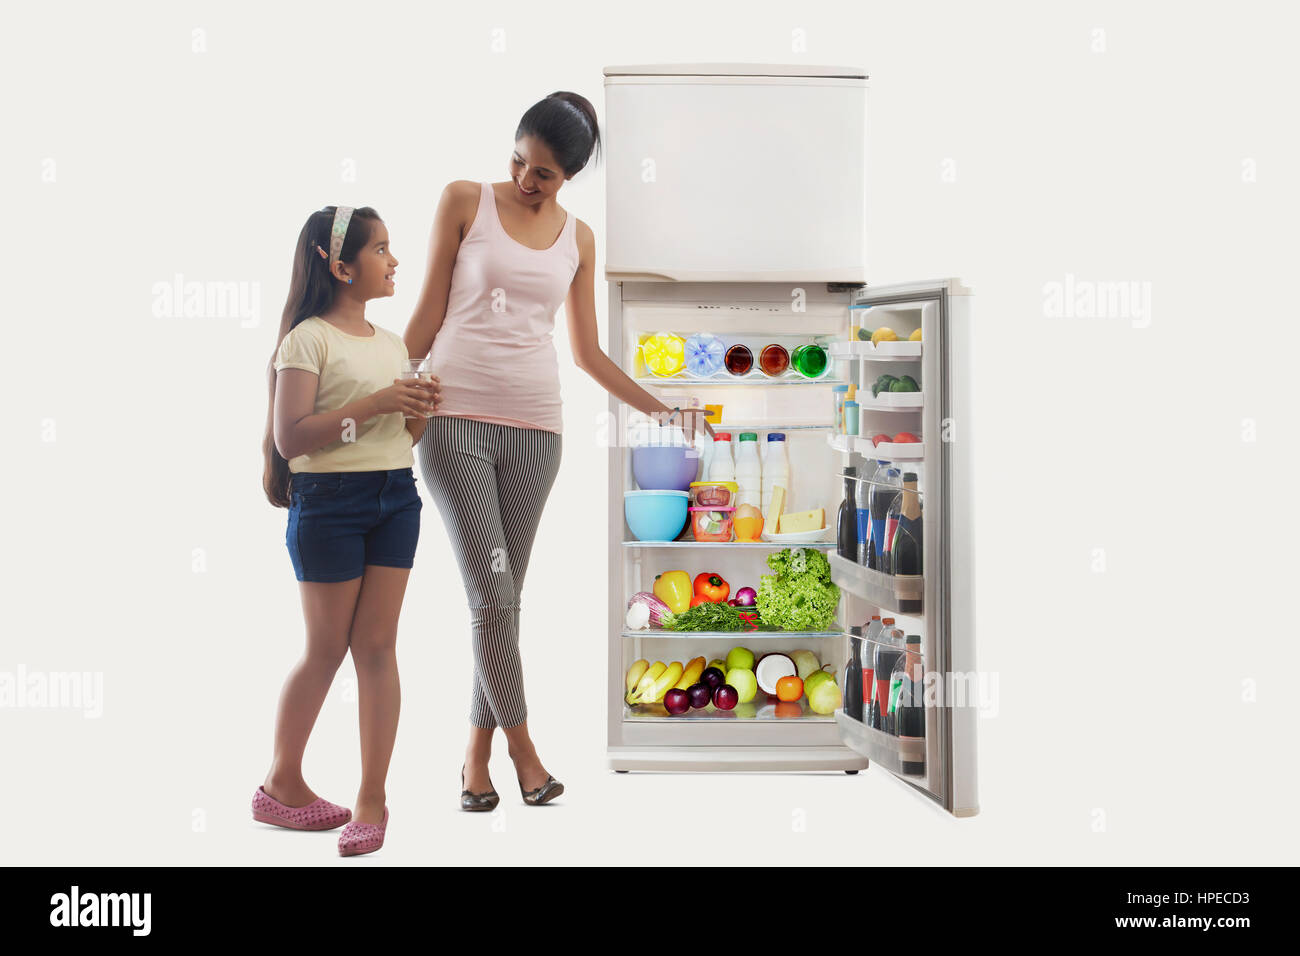 Daughter holding glass of water and mother pointing at refrigerator Stock Photo